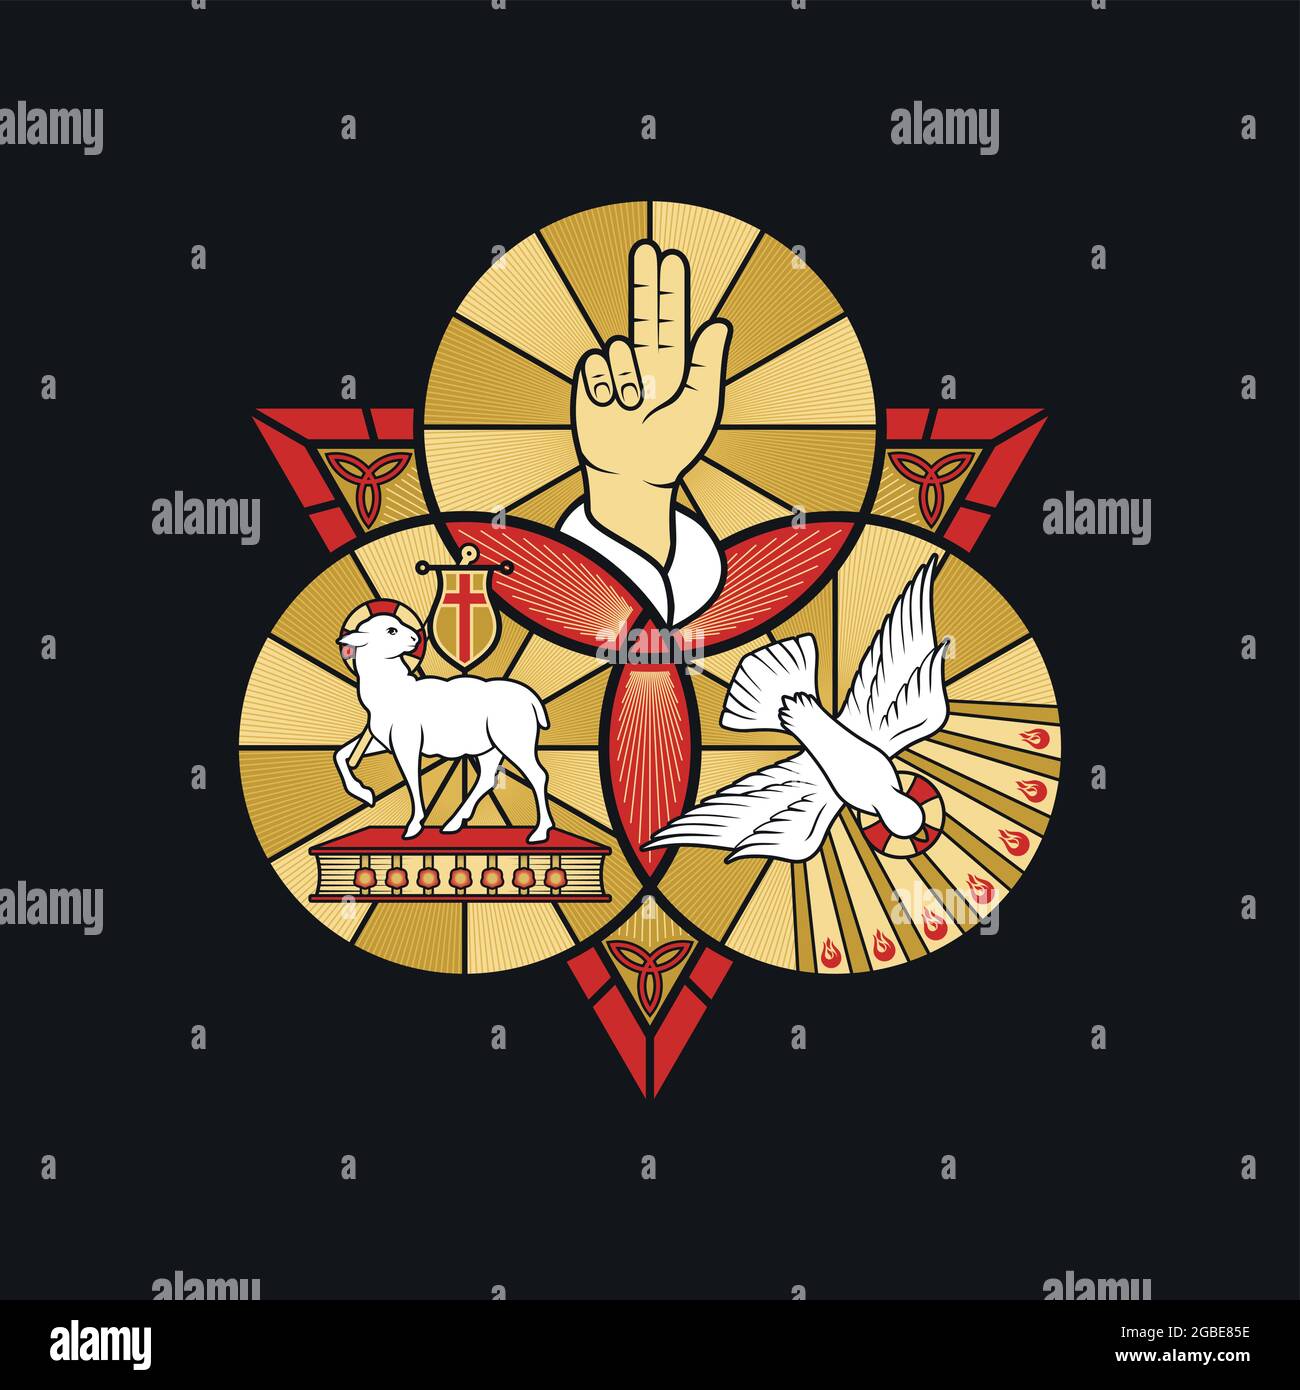 christian illustration the magnificent seal of the holy trinity god the father god the son and god the holy spirit indication of the symbols of th 2gbe85e